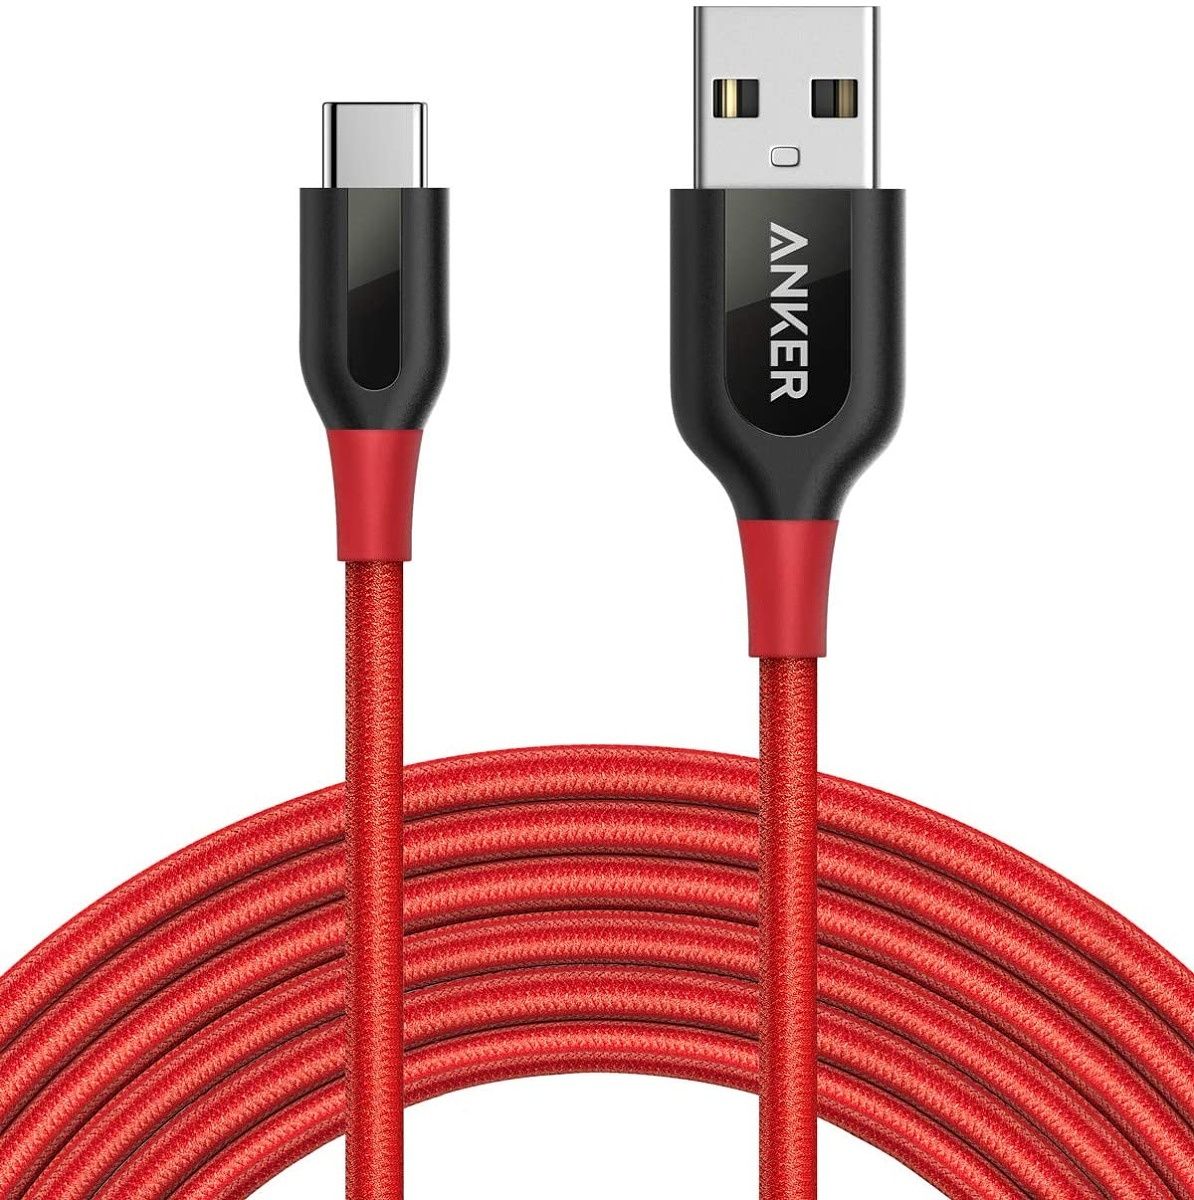 The Anker Powerline+ comes with a double-braided nylon exterior for extra durability. It is 10 feet in length, and you can get grey or red color options. The cable supports USB 2.0 speeds.